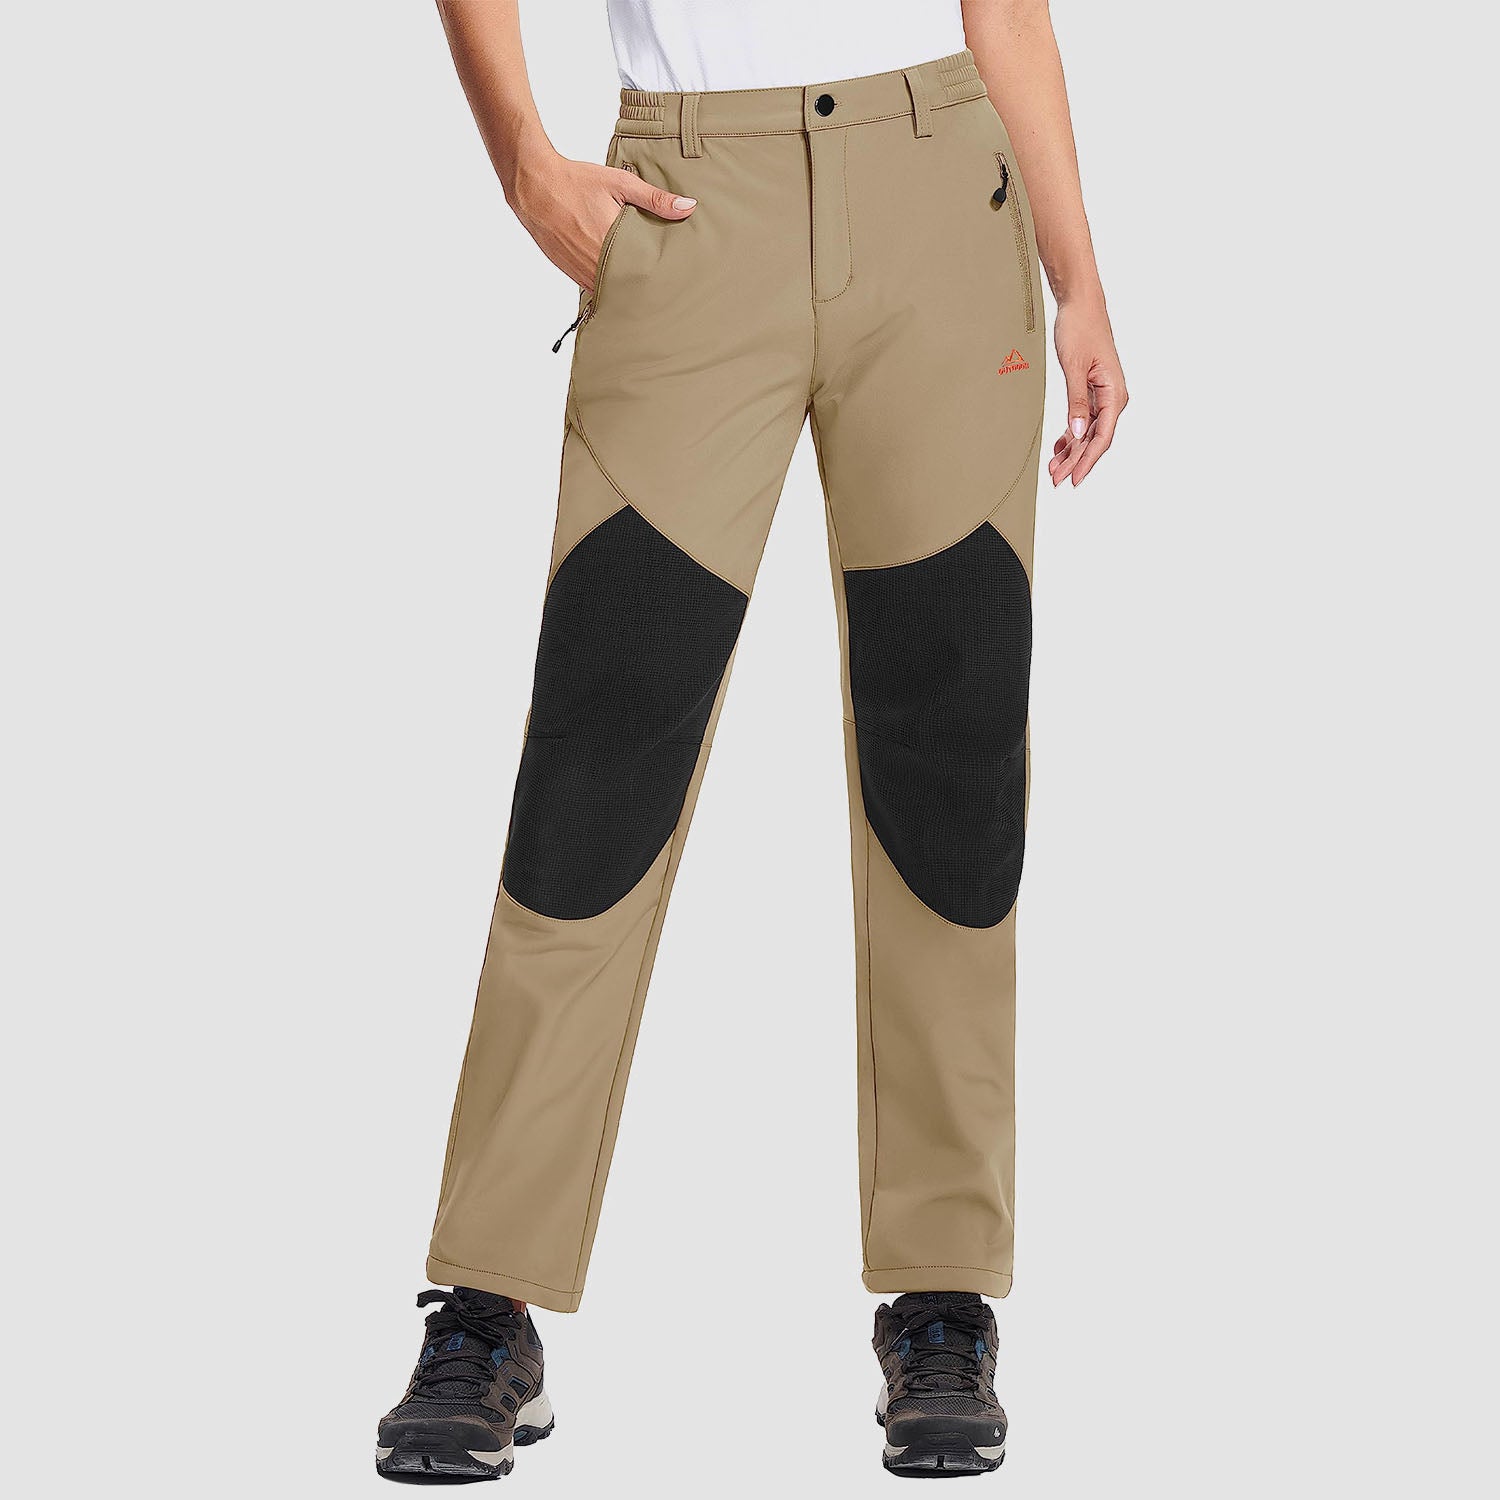 Women's Hiking Pants Fleece Lined Warm Pant with Articulated Knee Wate –  MAGCOMSEN